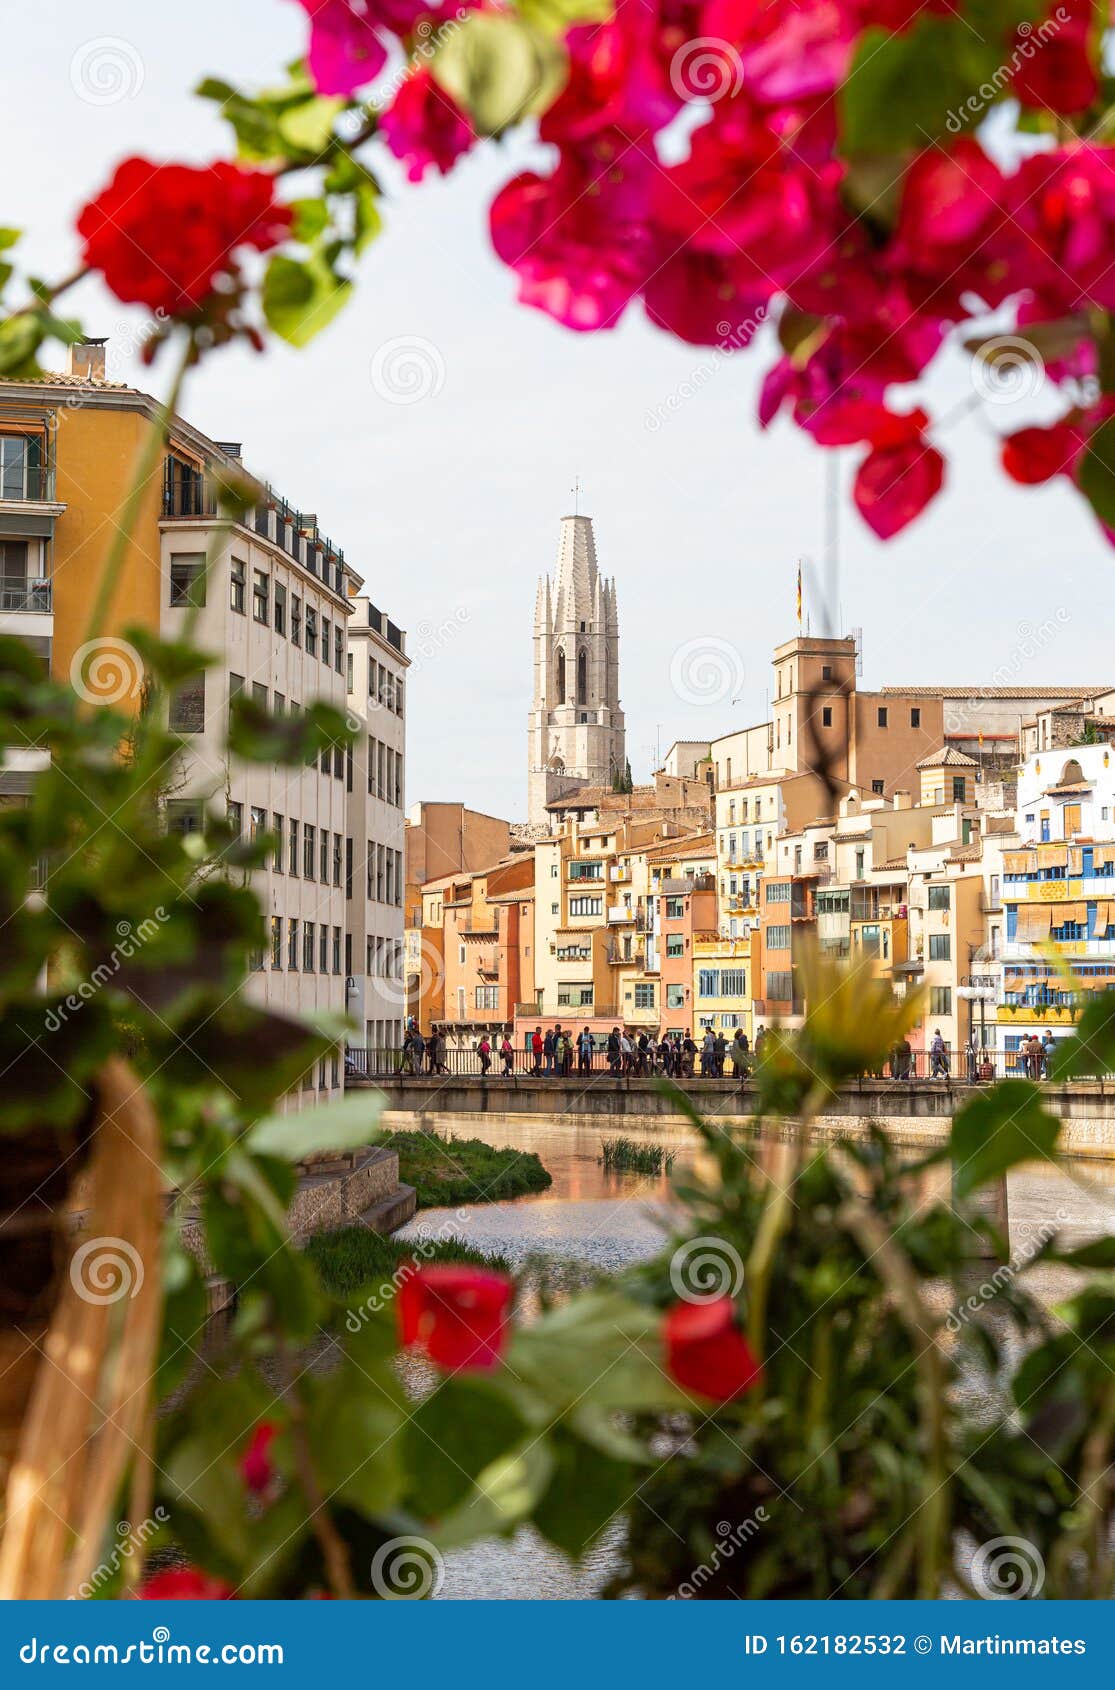 gerona city during the flower festival